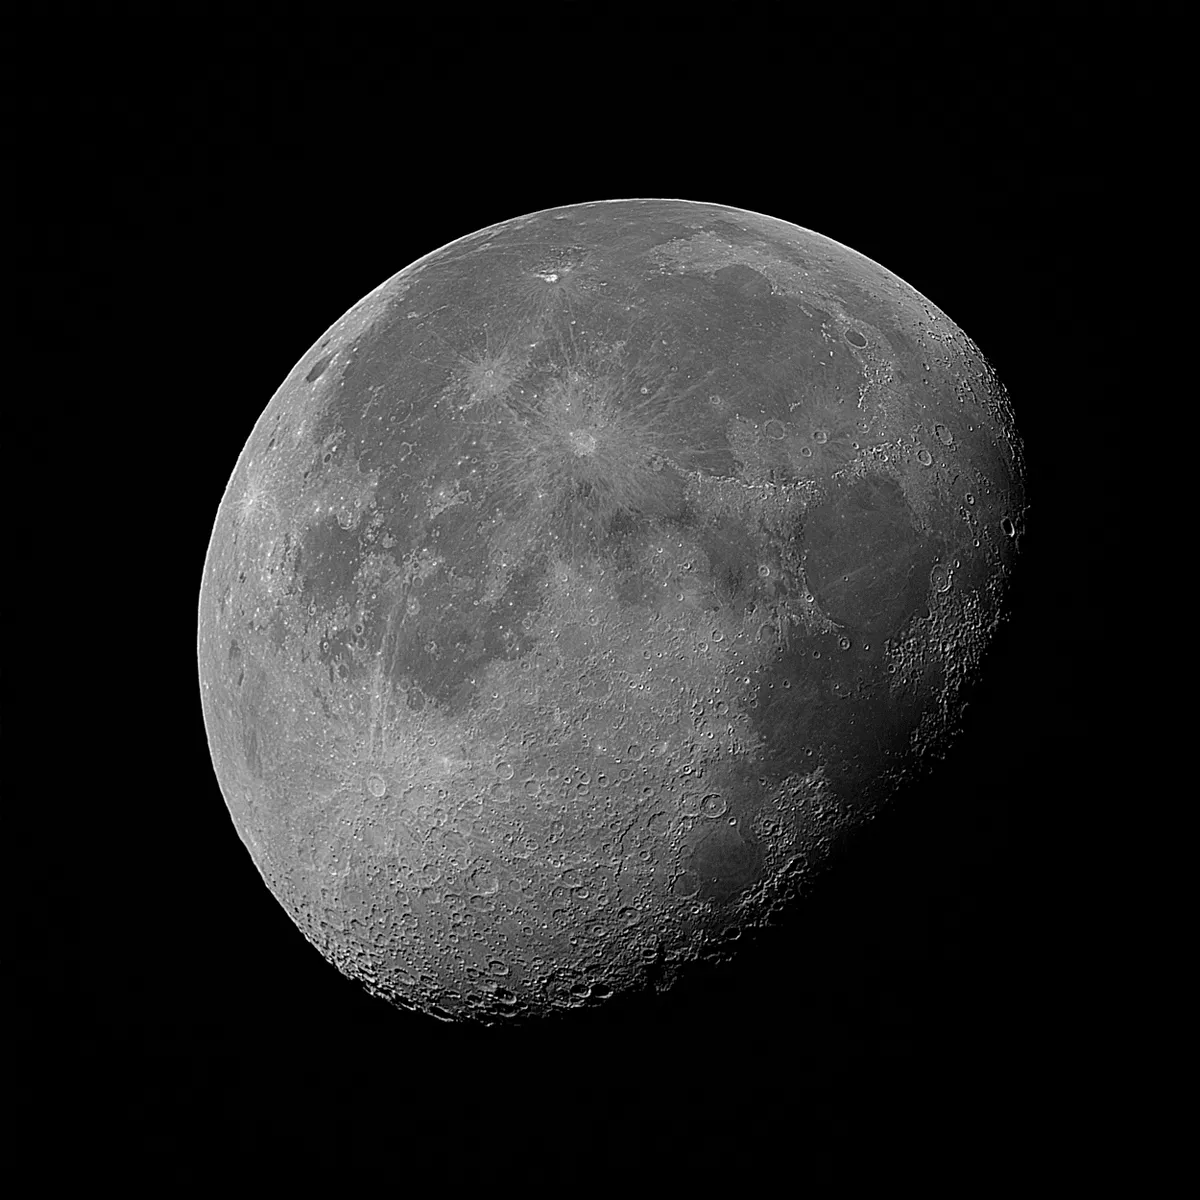 The Moon by Dave Garland, Bristol, UK. Equipment: Cannon 1100D, Skywatcher 200P, EQ5 Synscan